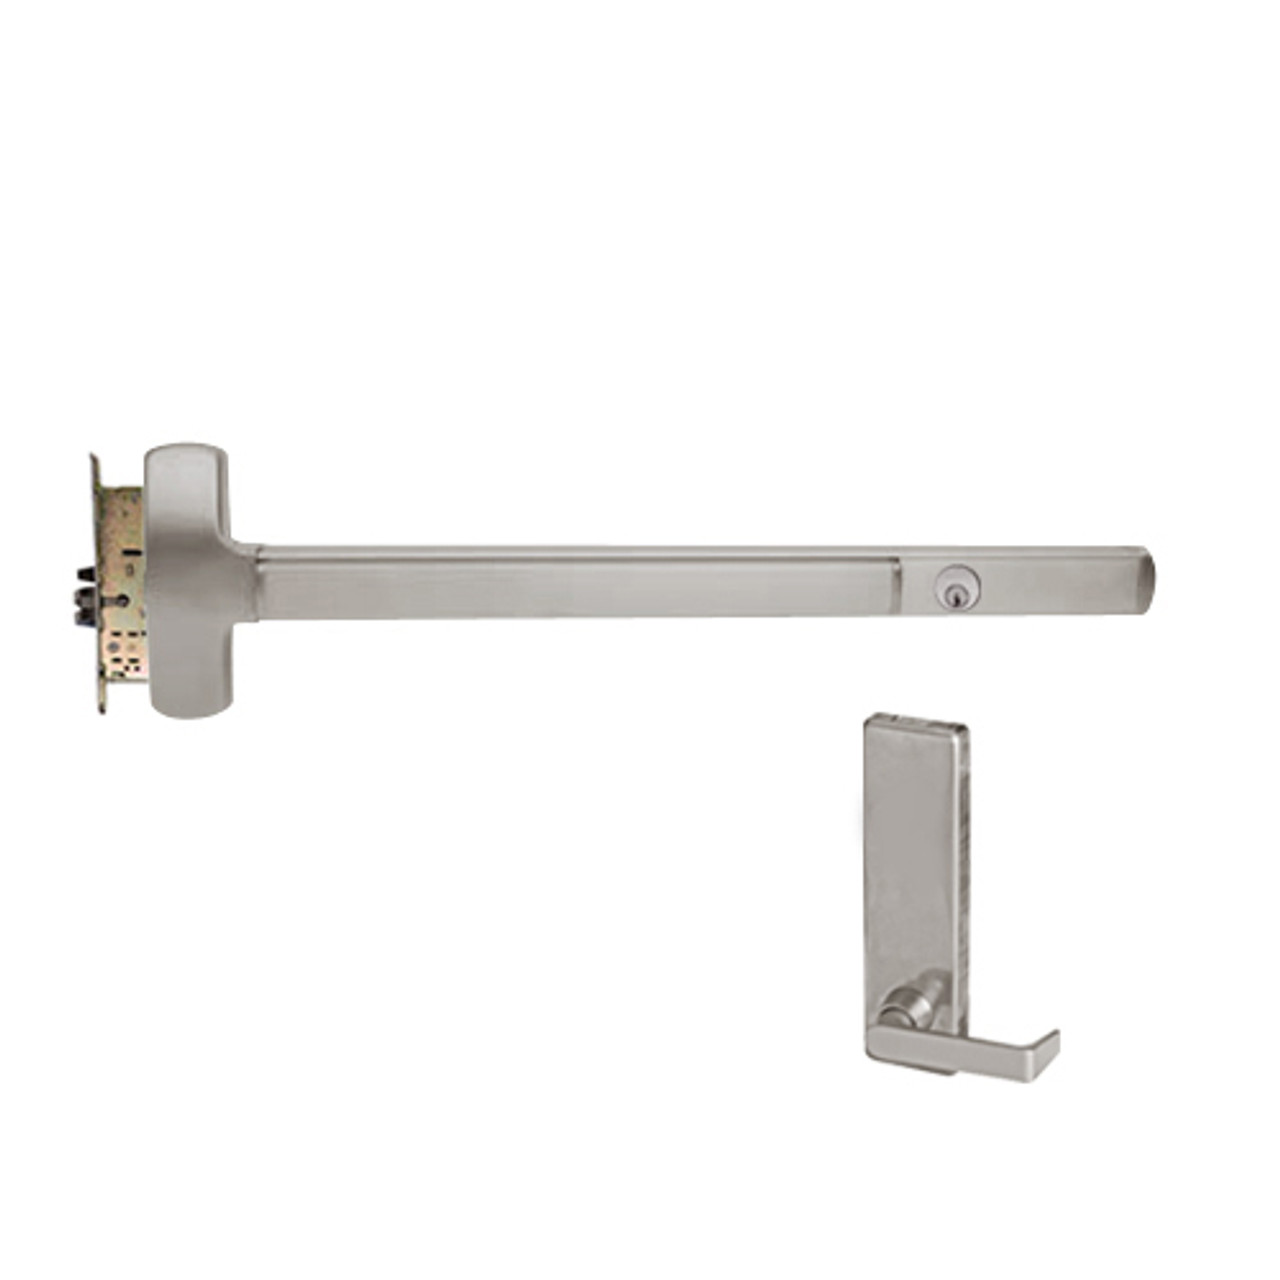 CD25-M-L-DT-DANE-US32D-3-RHR Falcon Exit Device in Satin Stainless Steel